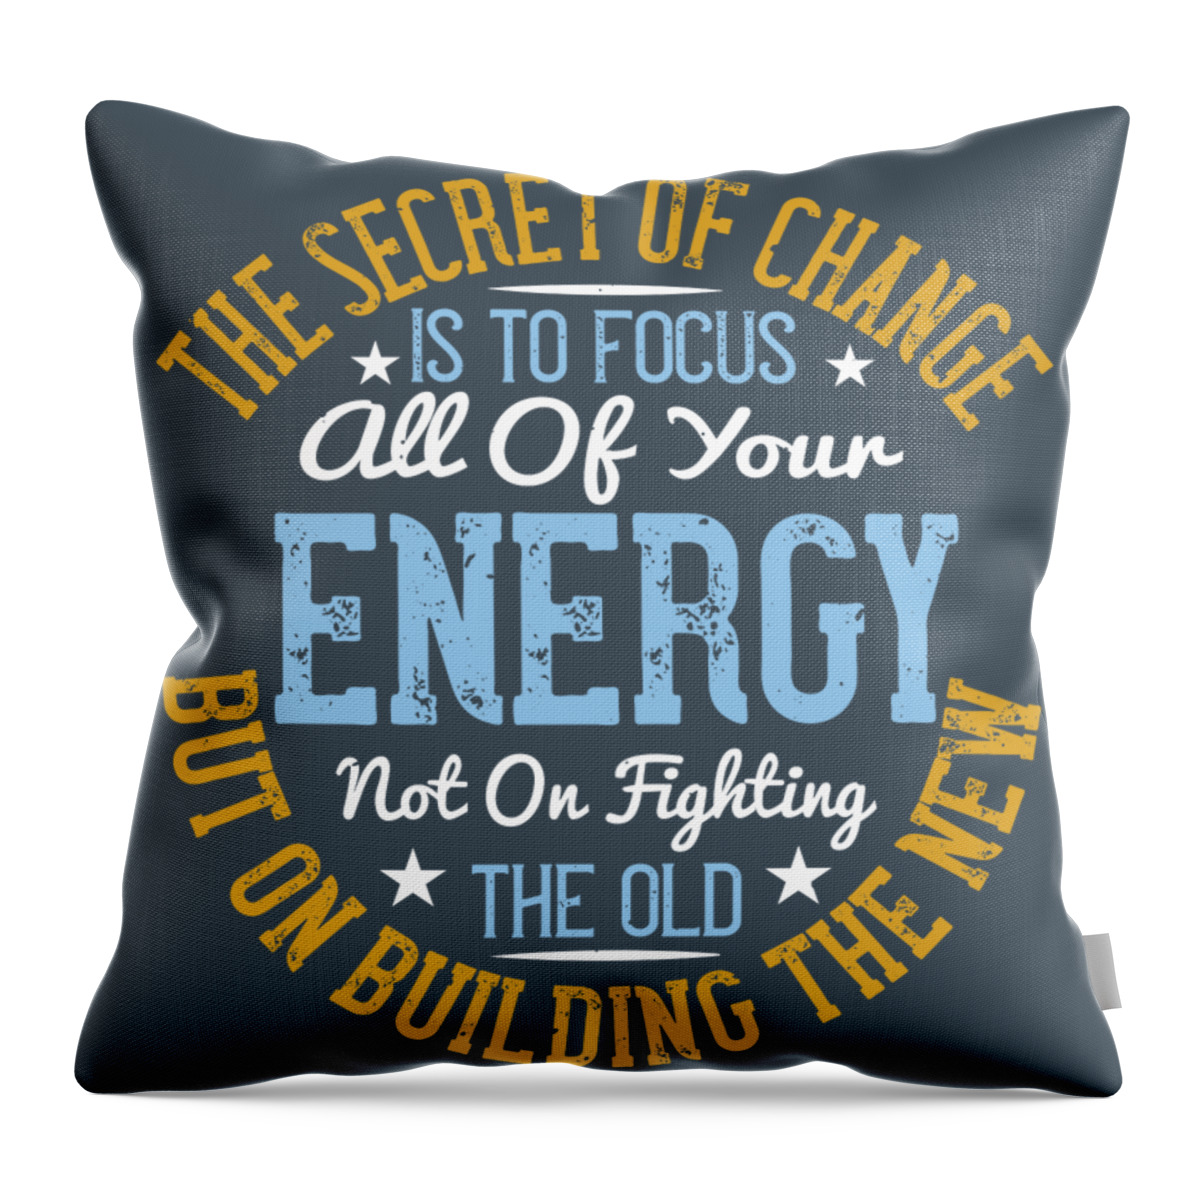 Yoga Throw Pillow featuring the digital art Yoga Gift The Secret Of Change Is To Focus All Of Your Energy On Building The New by Jeff Creation